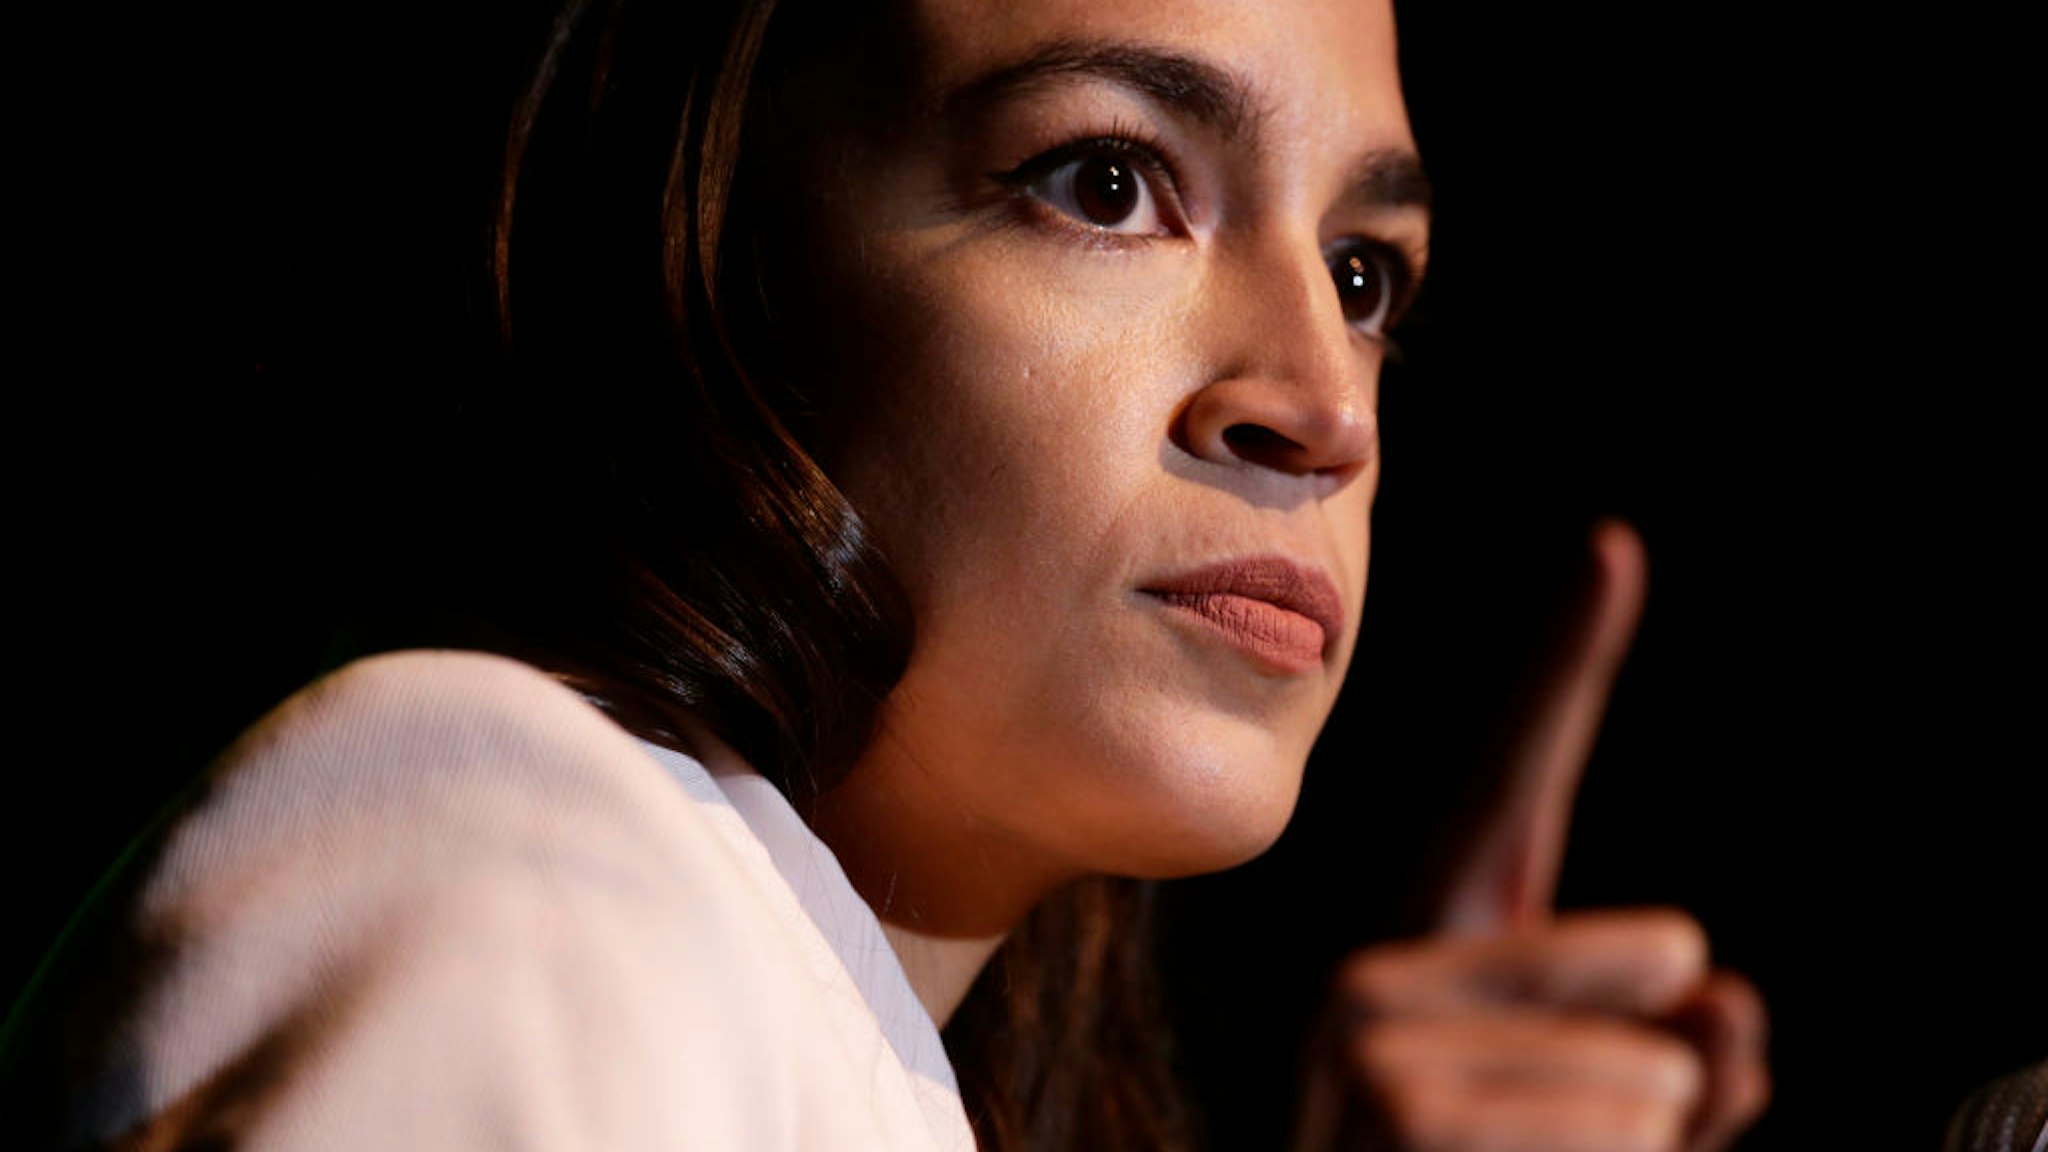 Alexandria Ocasio-Cortez speaks during a rally at Howard University